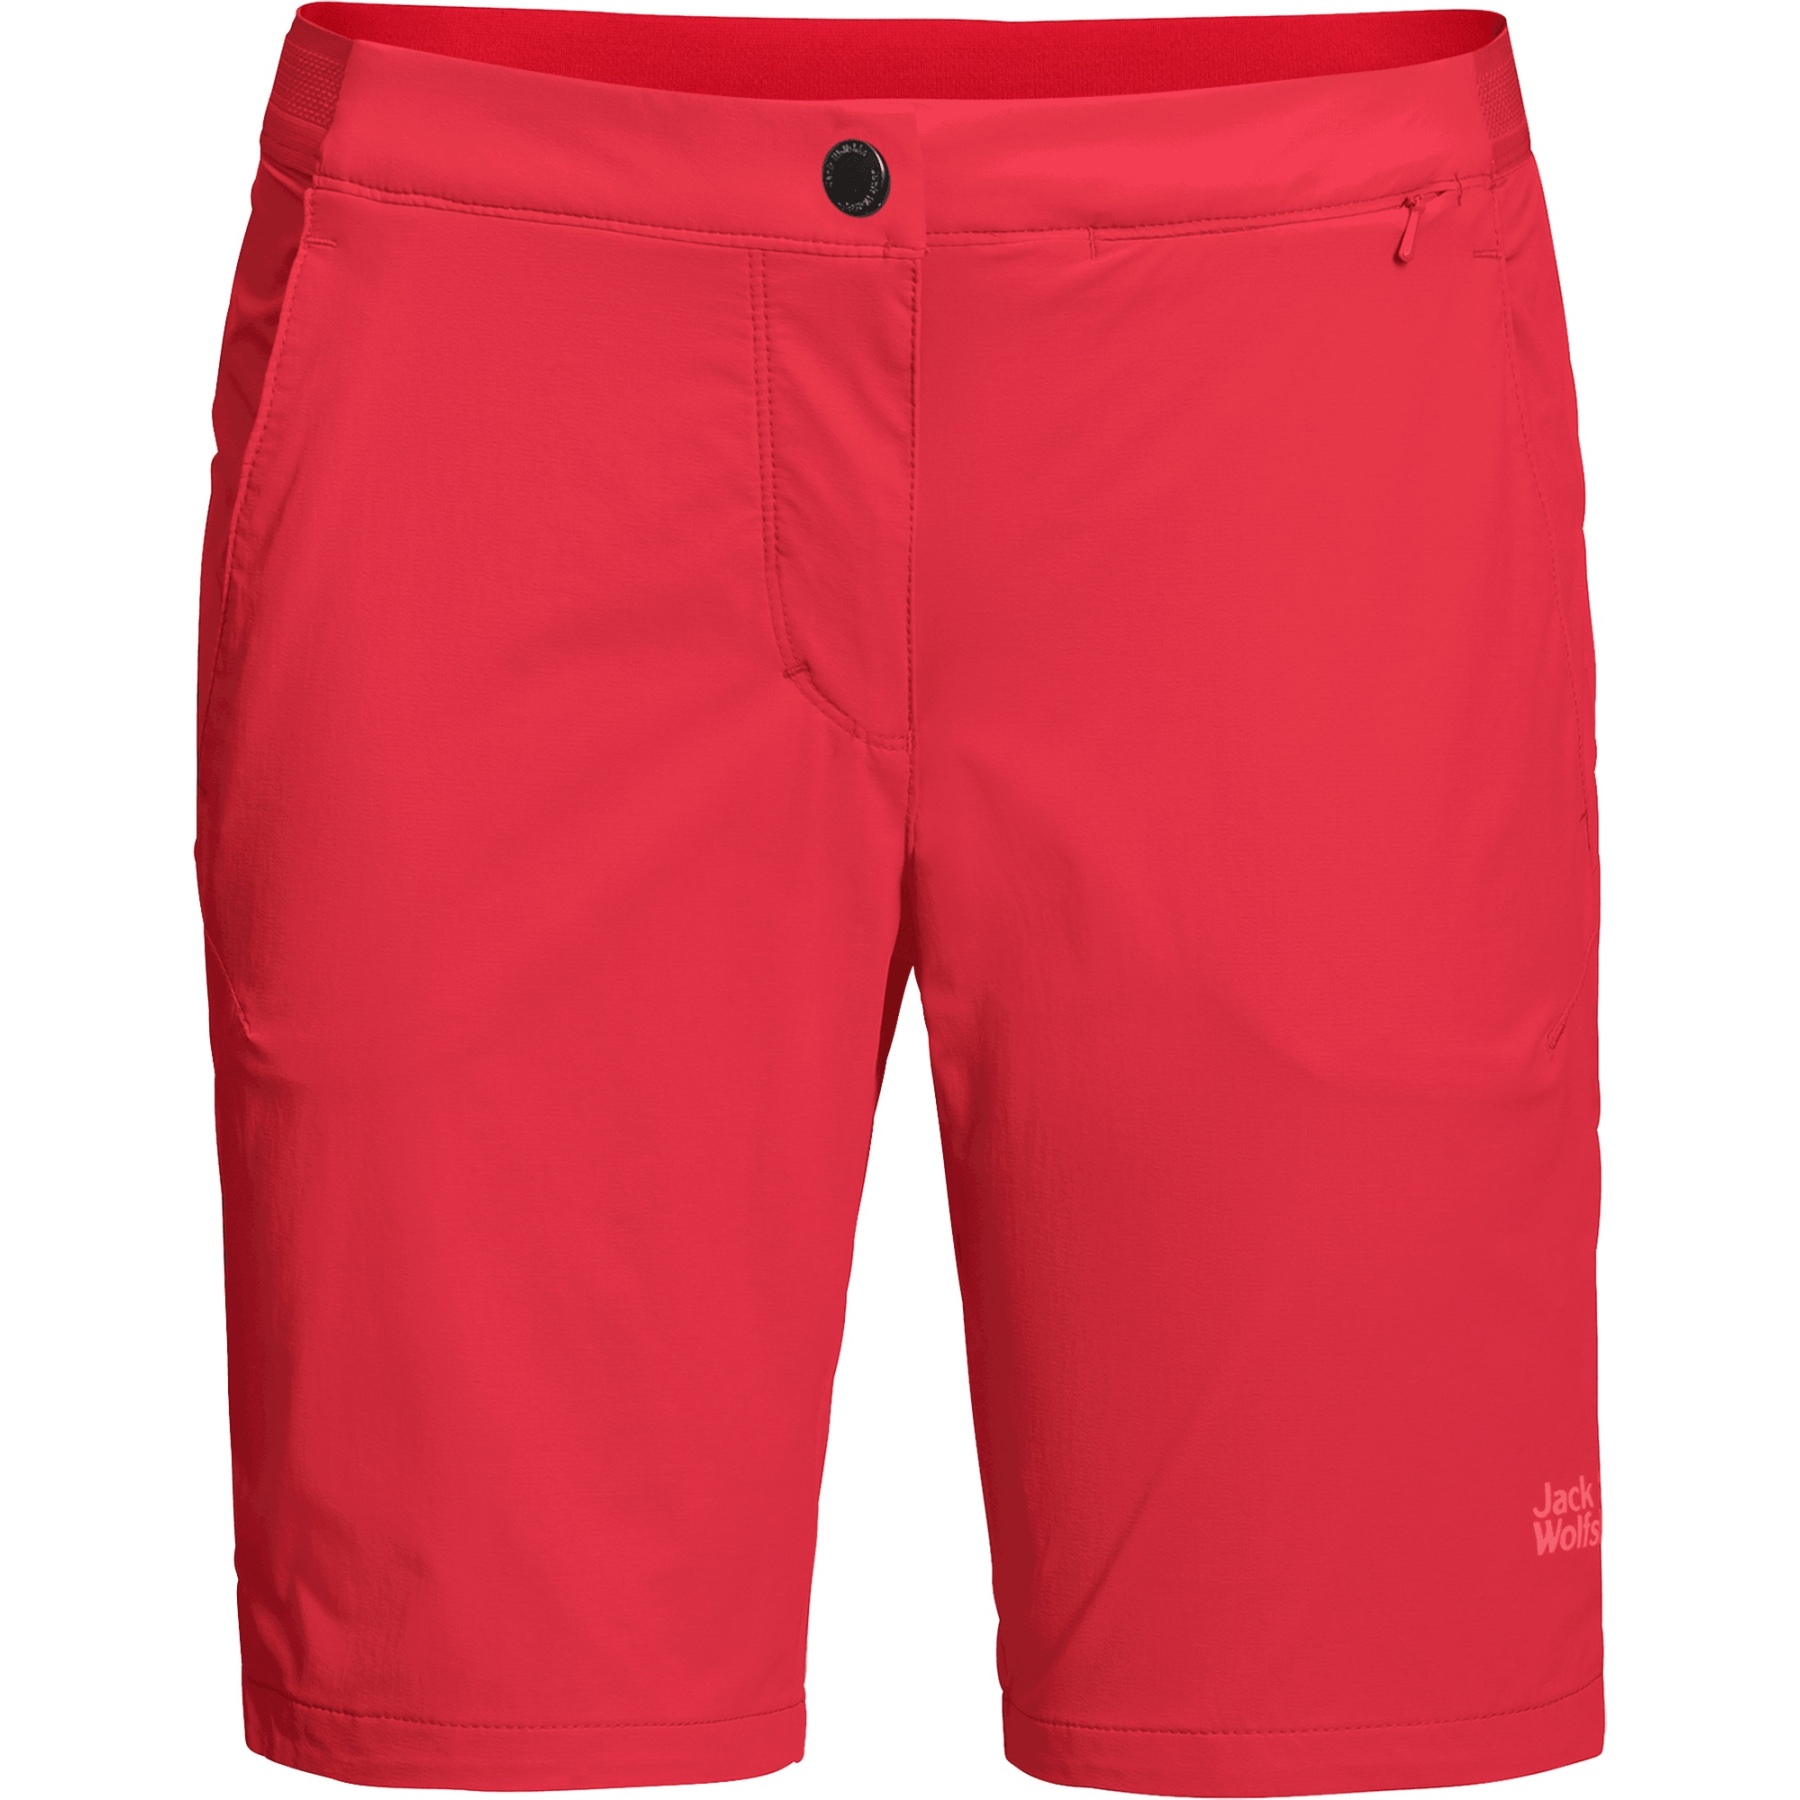 Picture of Jack Wolfskin Hilltop Trail Shorts Women 1505461 - tulip red